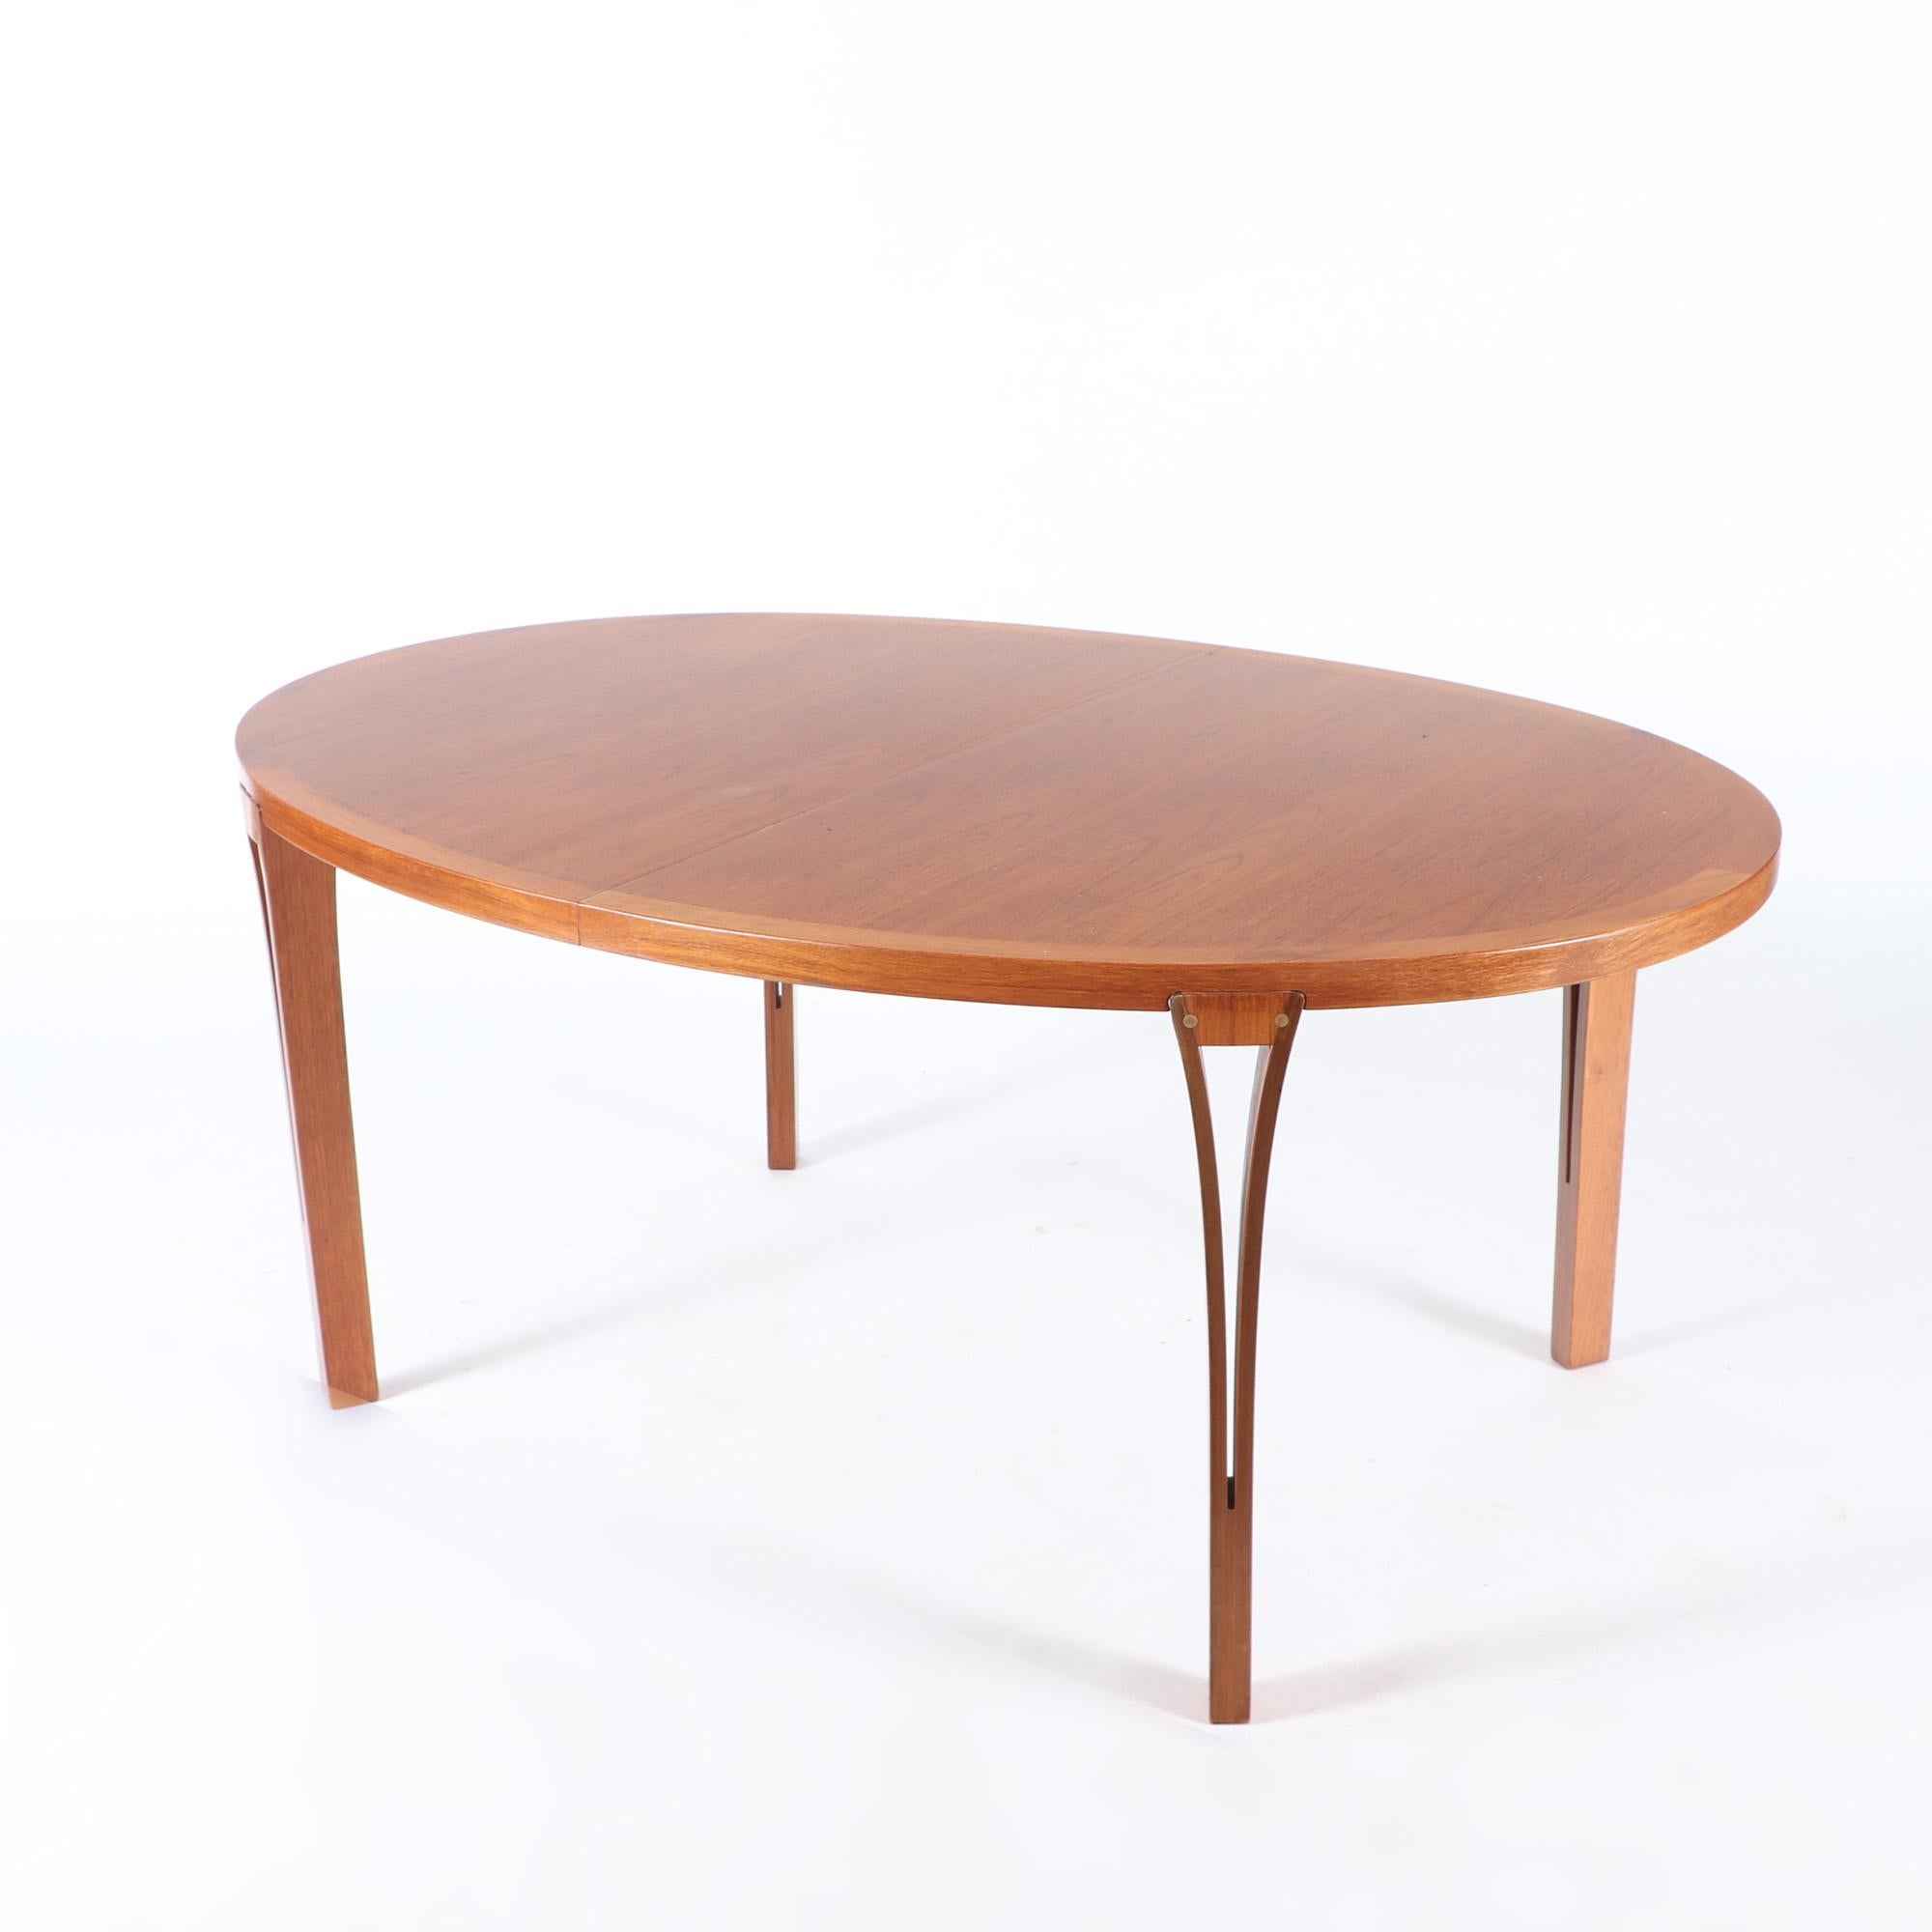 A signed Sven Ellekaer mid century modern teak Danish dining room table with two leaves circa 1960. Having sculptural clothespin form legs.
Leaves being 19.75